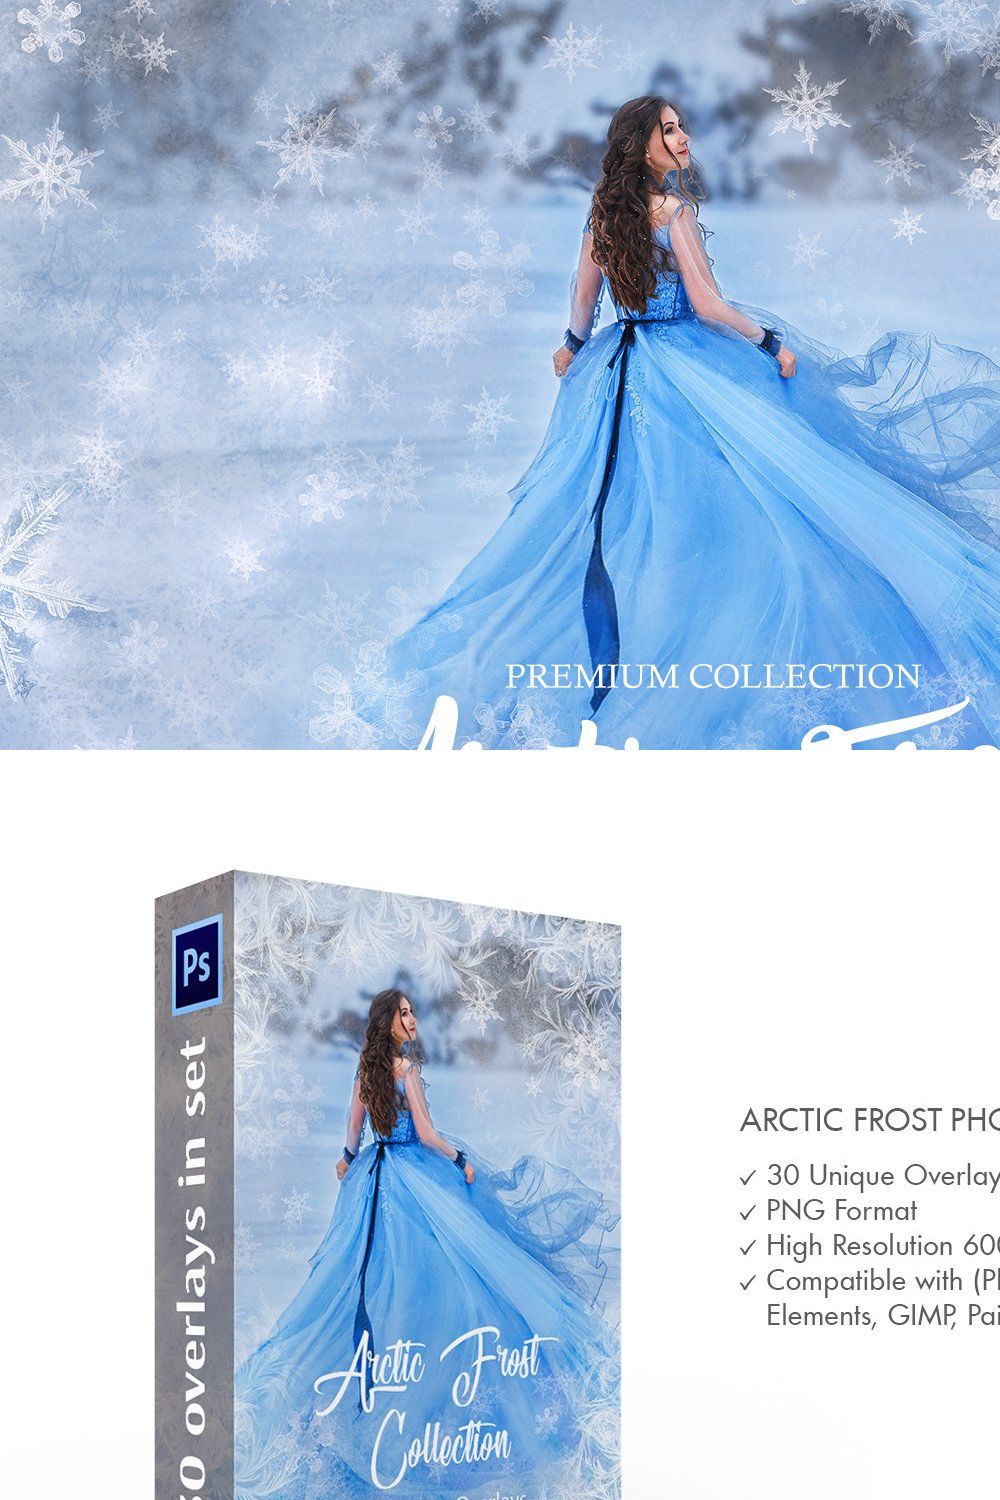 Artic Frost Photoshop Overlays pinterest preview image.